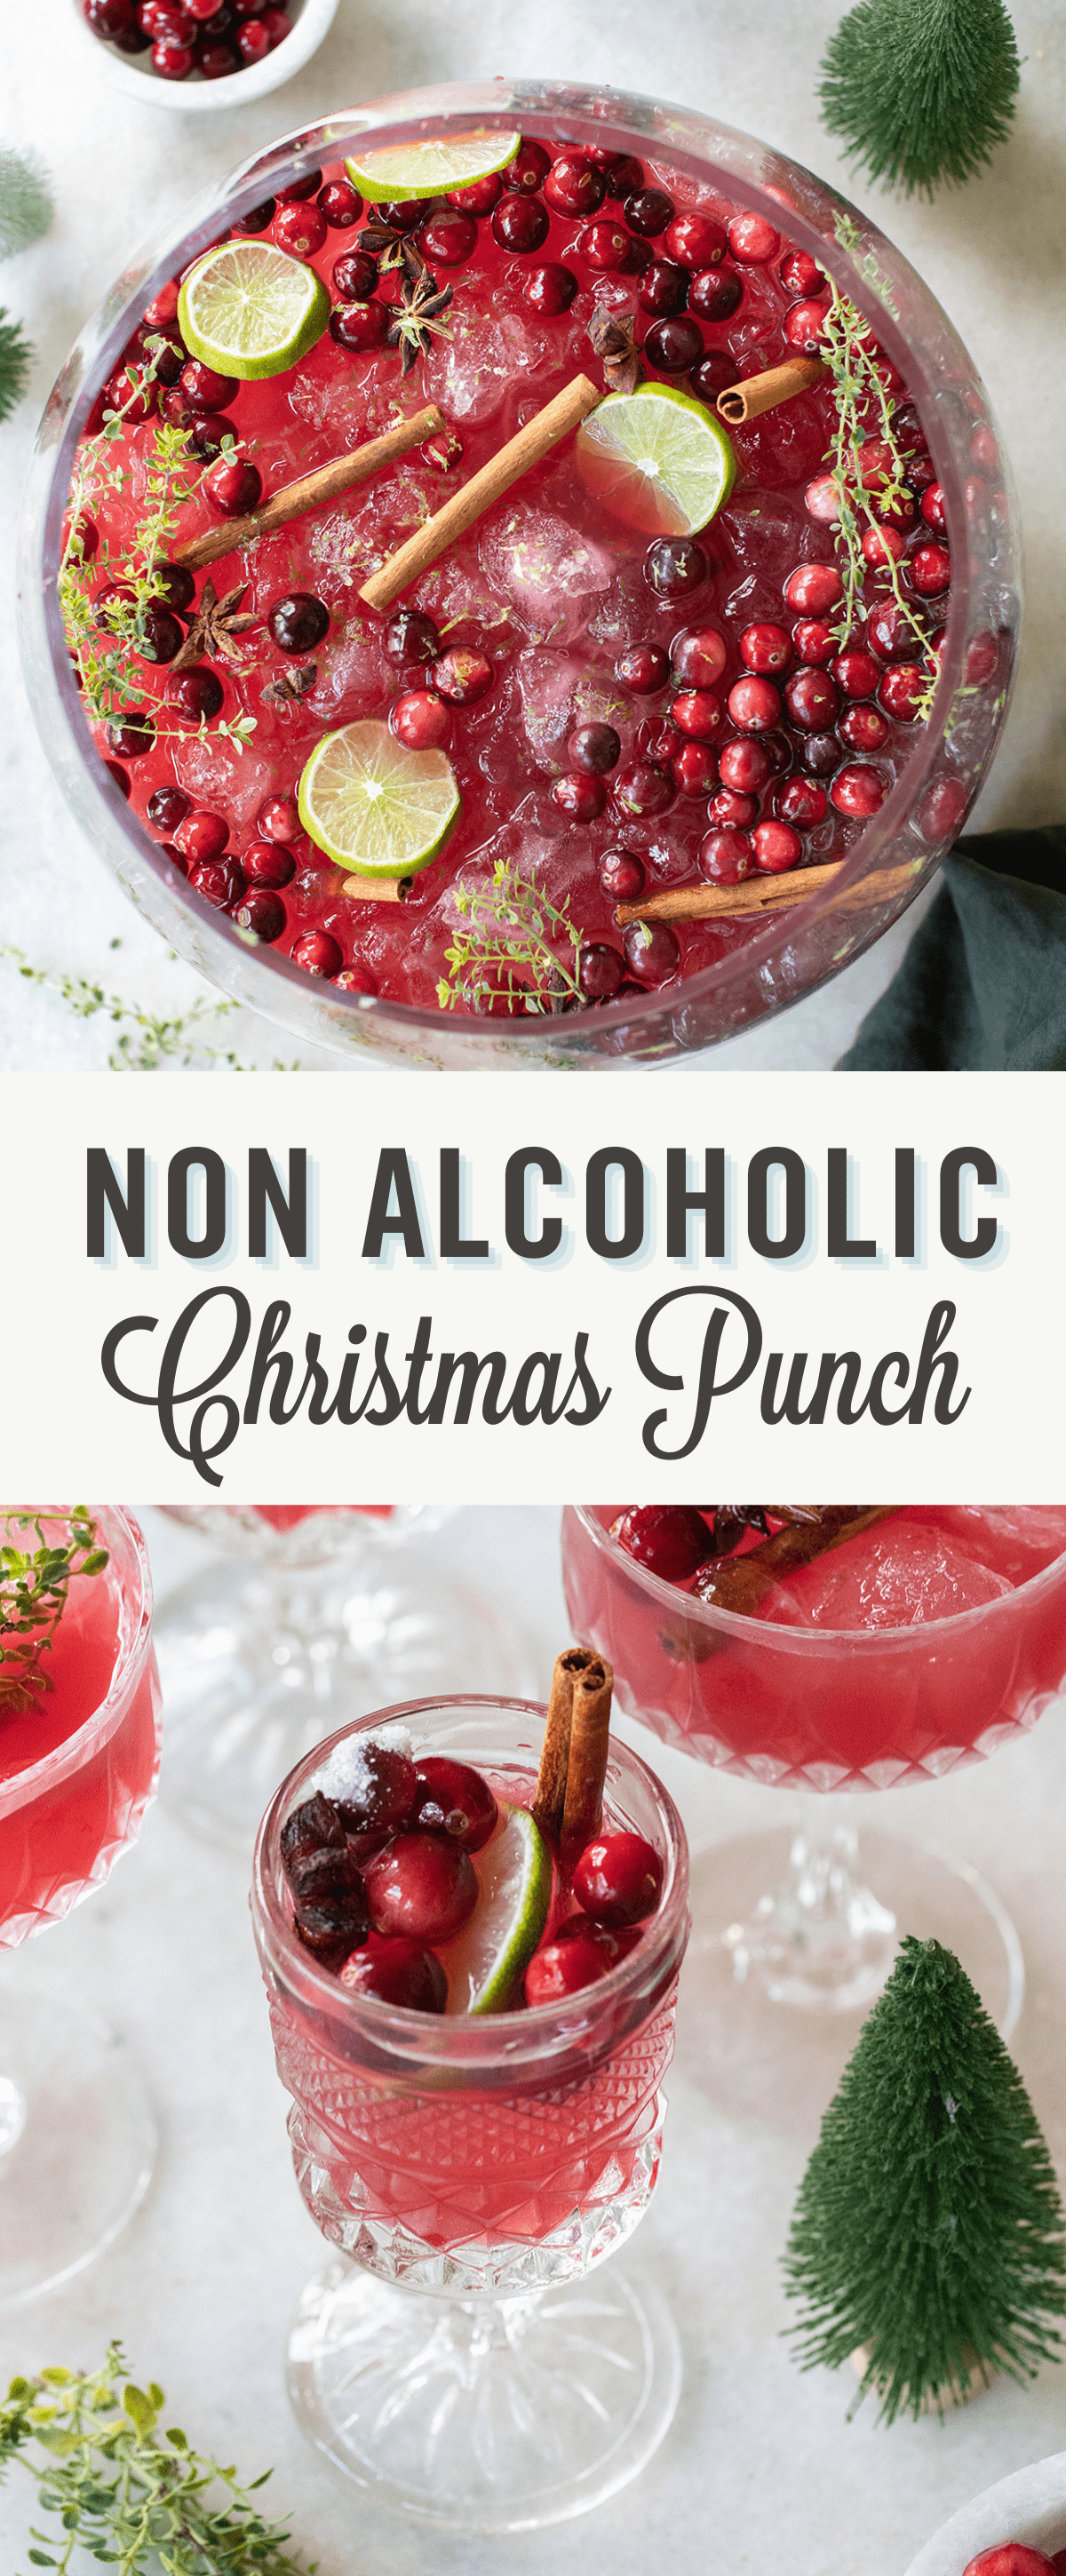 non alcoholic Christmas punch recipe with text.